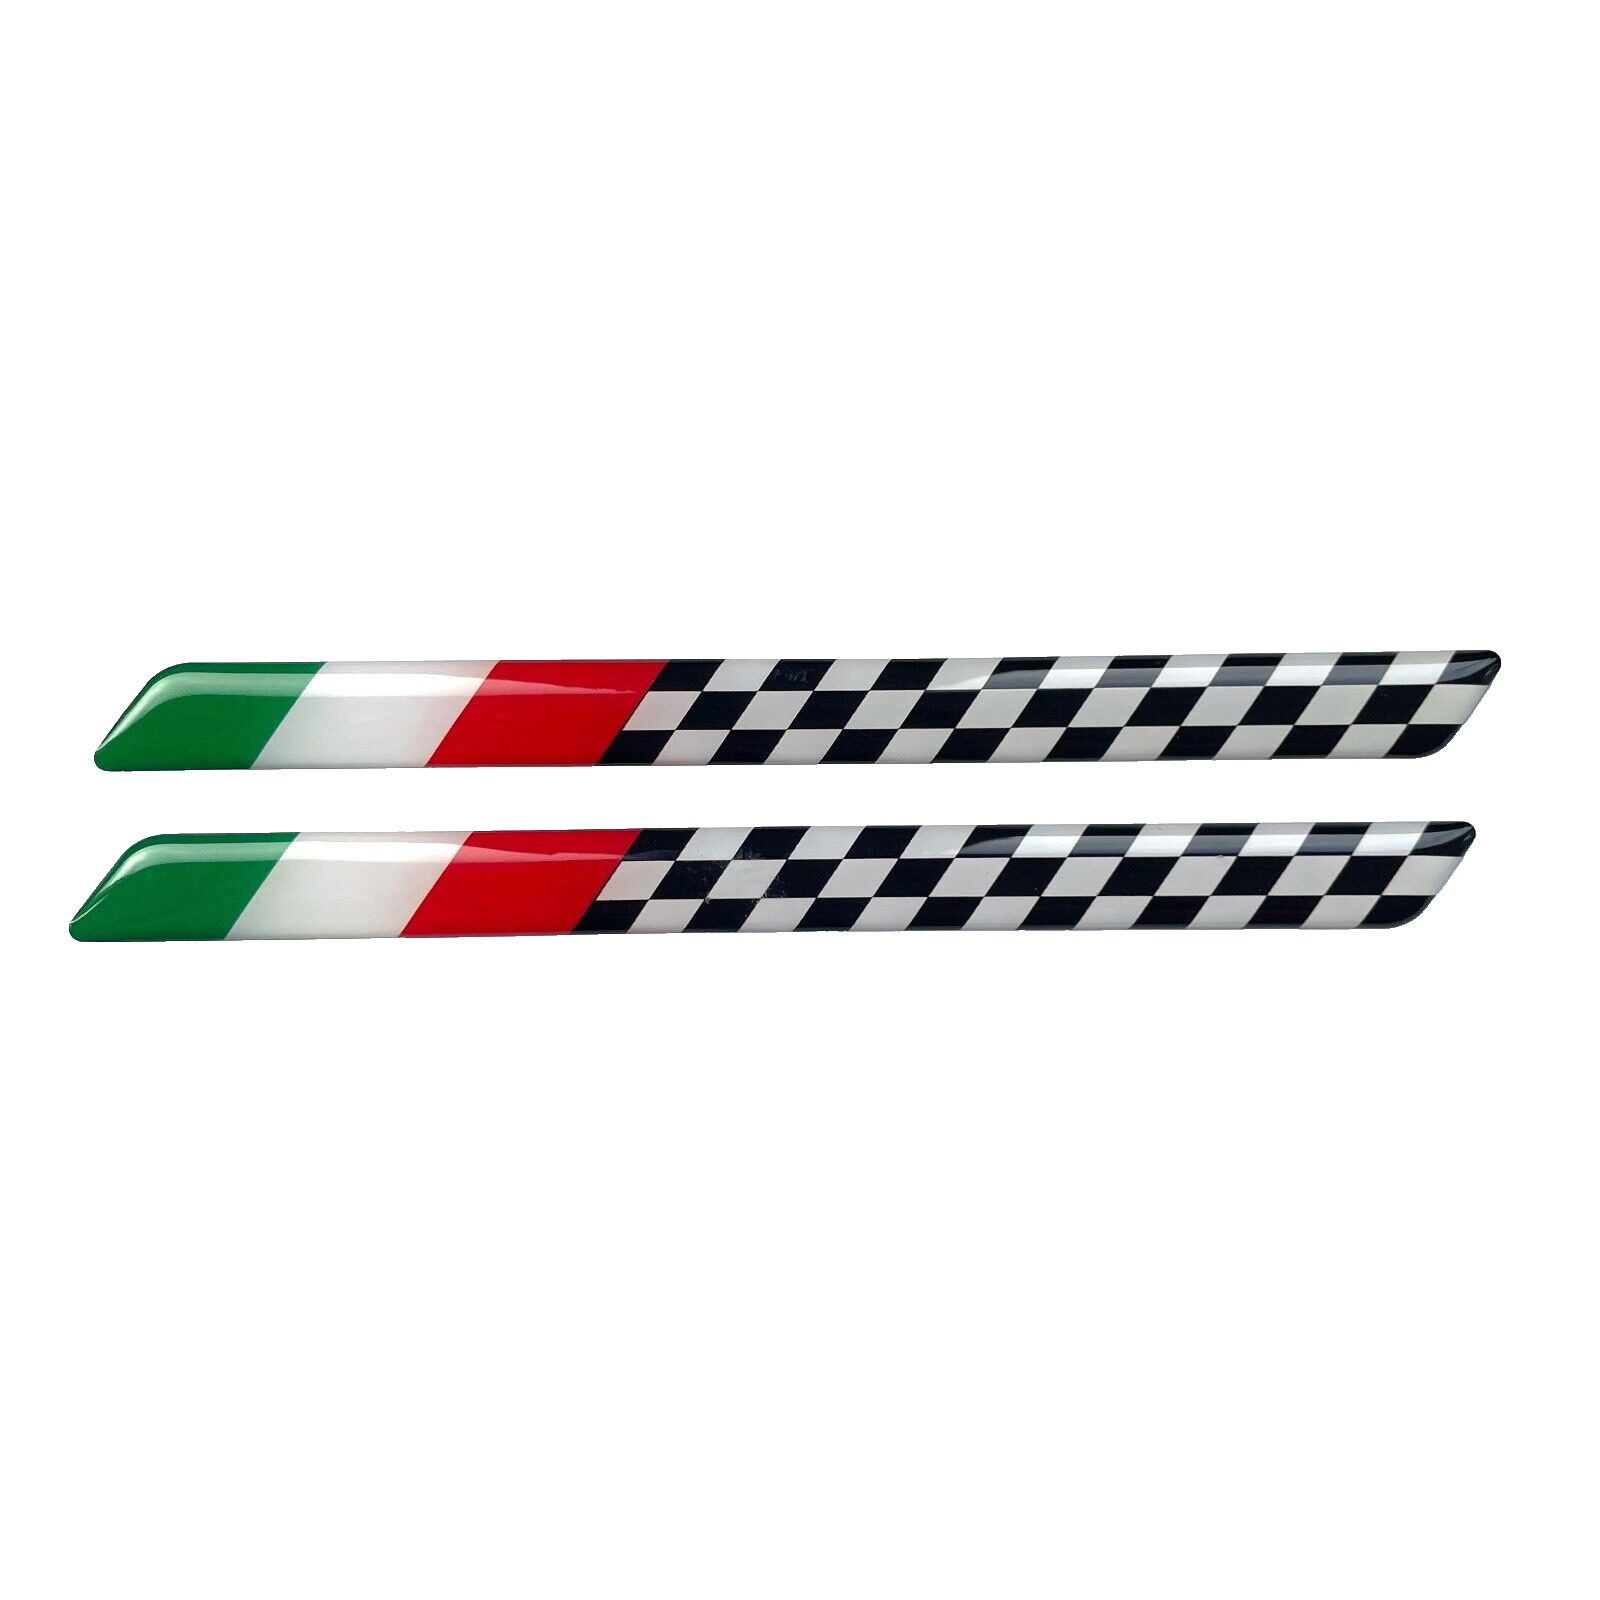 2x Italy Racing Edition Italy Italia 3D Gel Sticker Sticker Scooter Moped Car